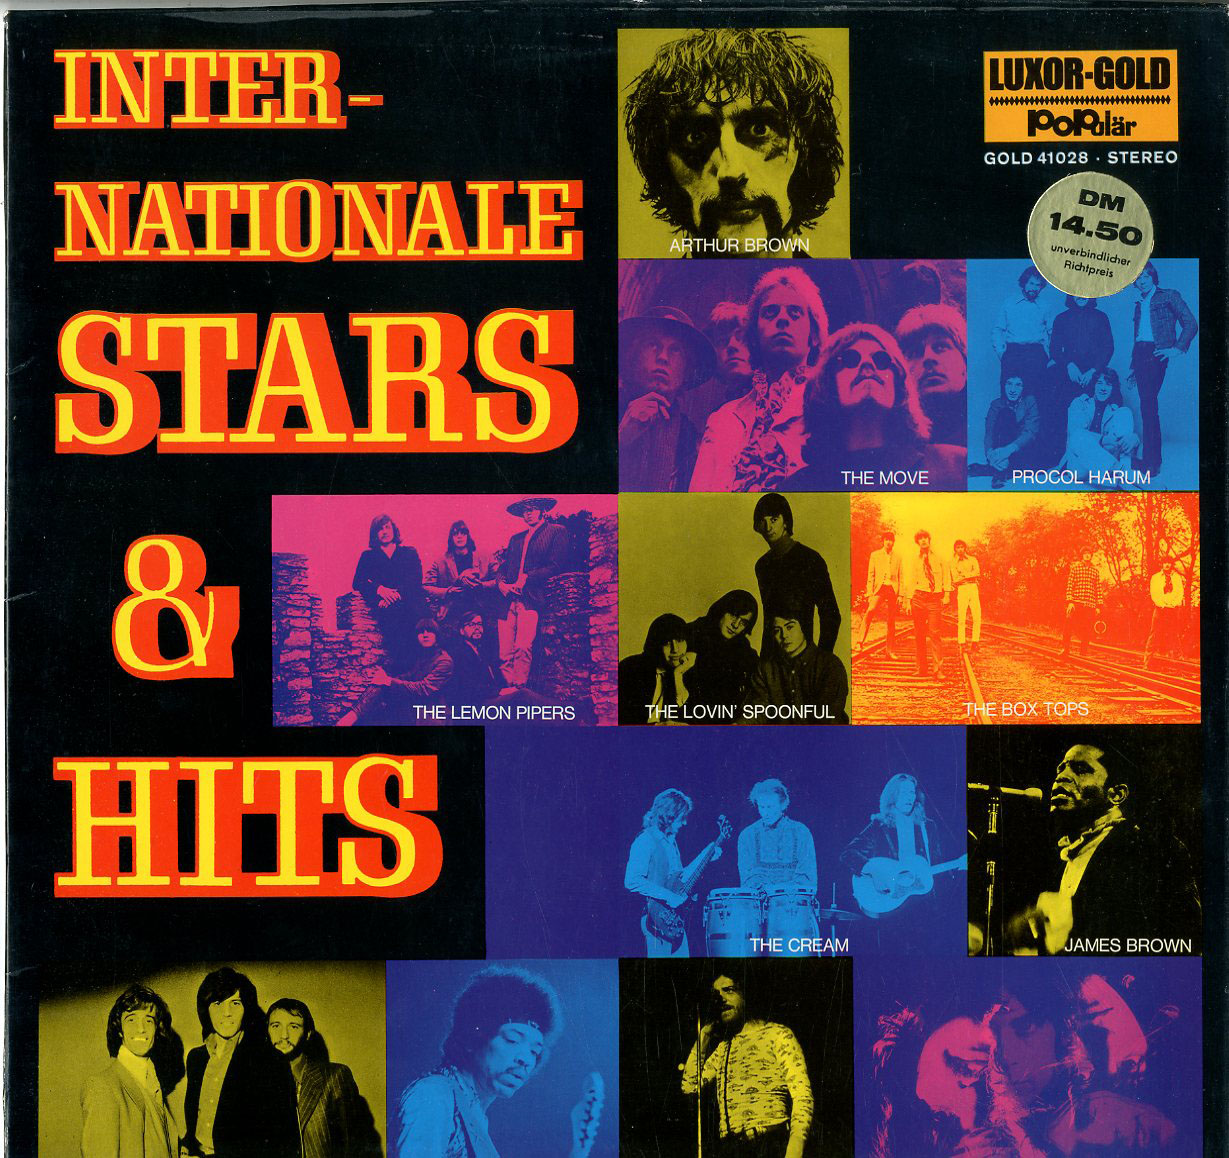 Albumcover Various Artists of the 70s - Internationale Stars & Hits (Luxor-Gold Populär)